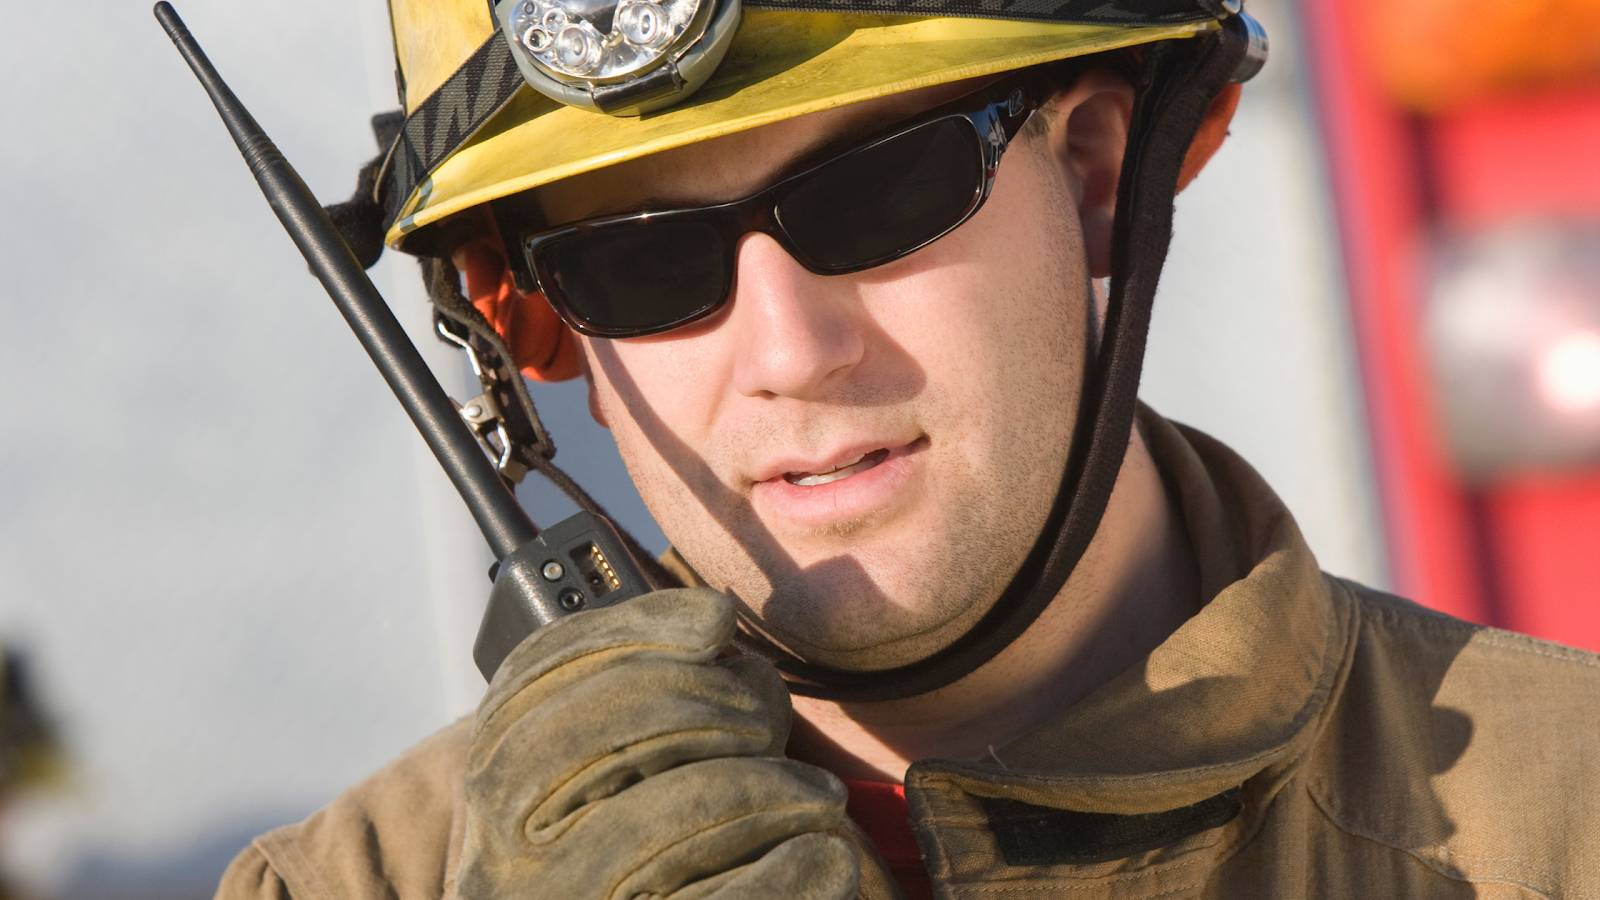 fire fighter talking on two way radios